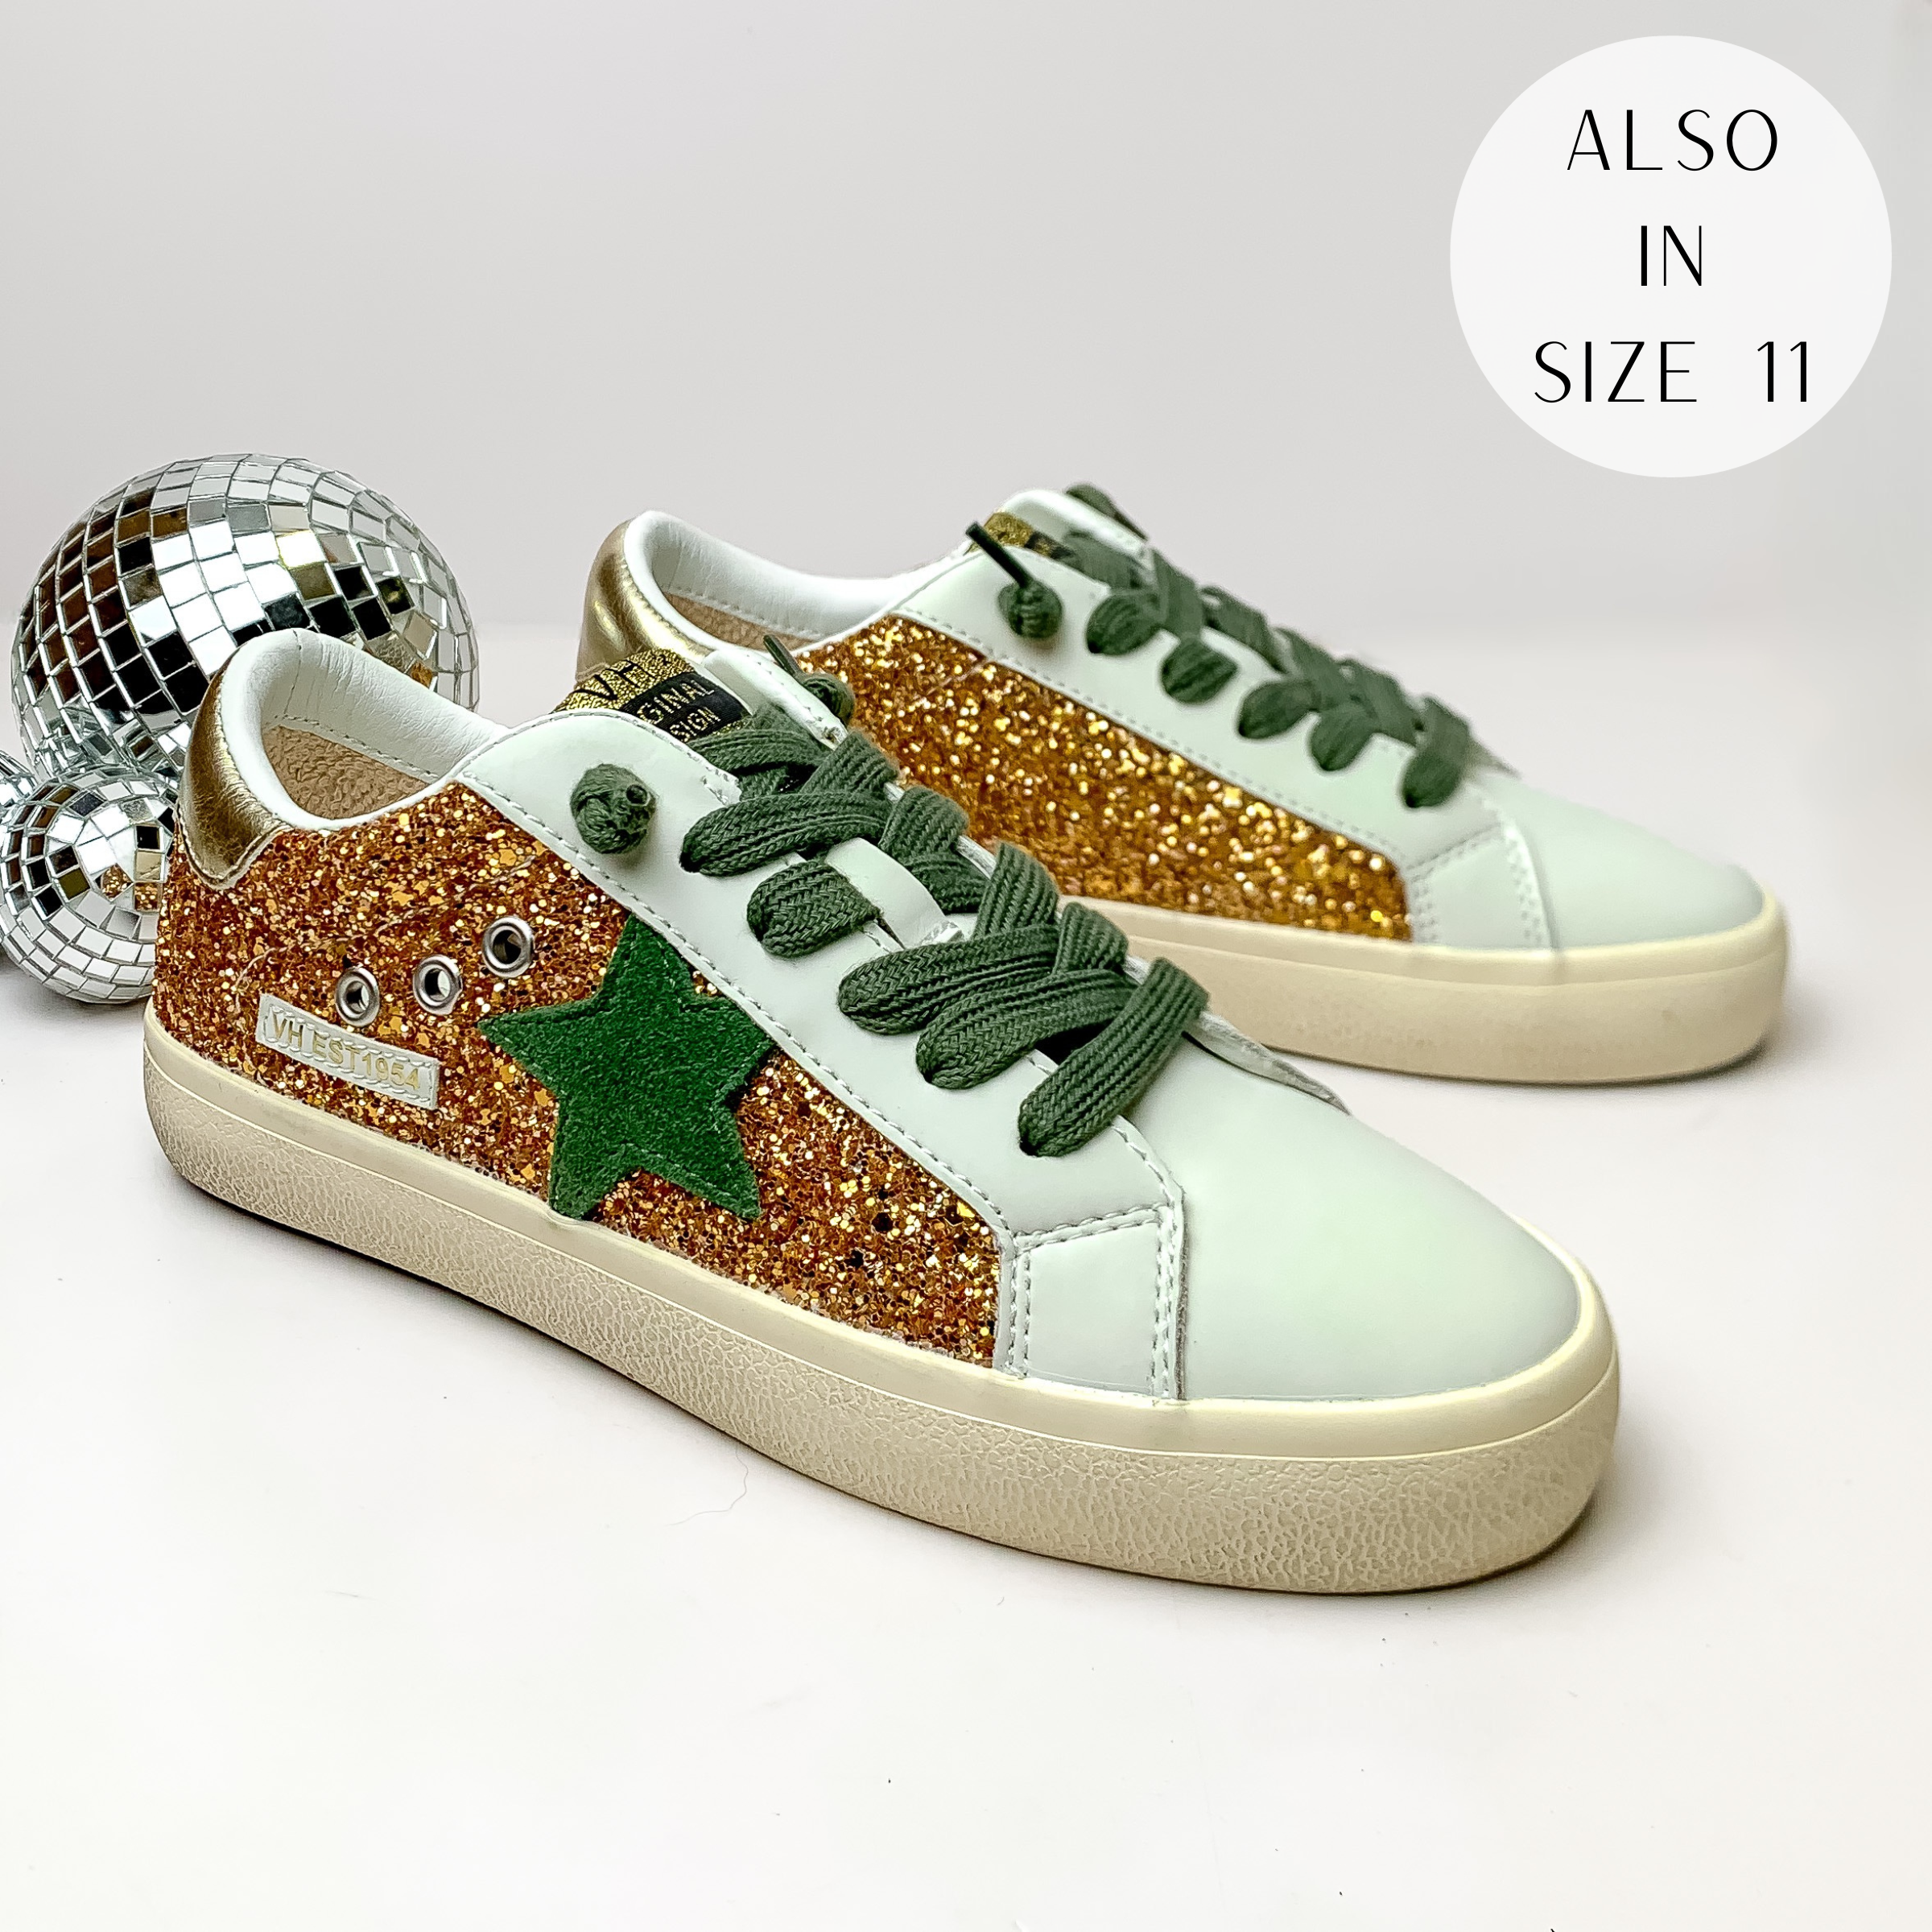 Pictured is a pair of ivory tennis shoes with gold and olive green detailing. These shoes include a gold shimmer heel, an olive green star on the side, and olive green laces. These shoes are pictured on a white background with disco balls on the left side